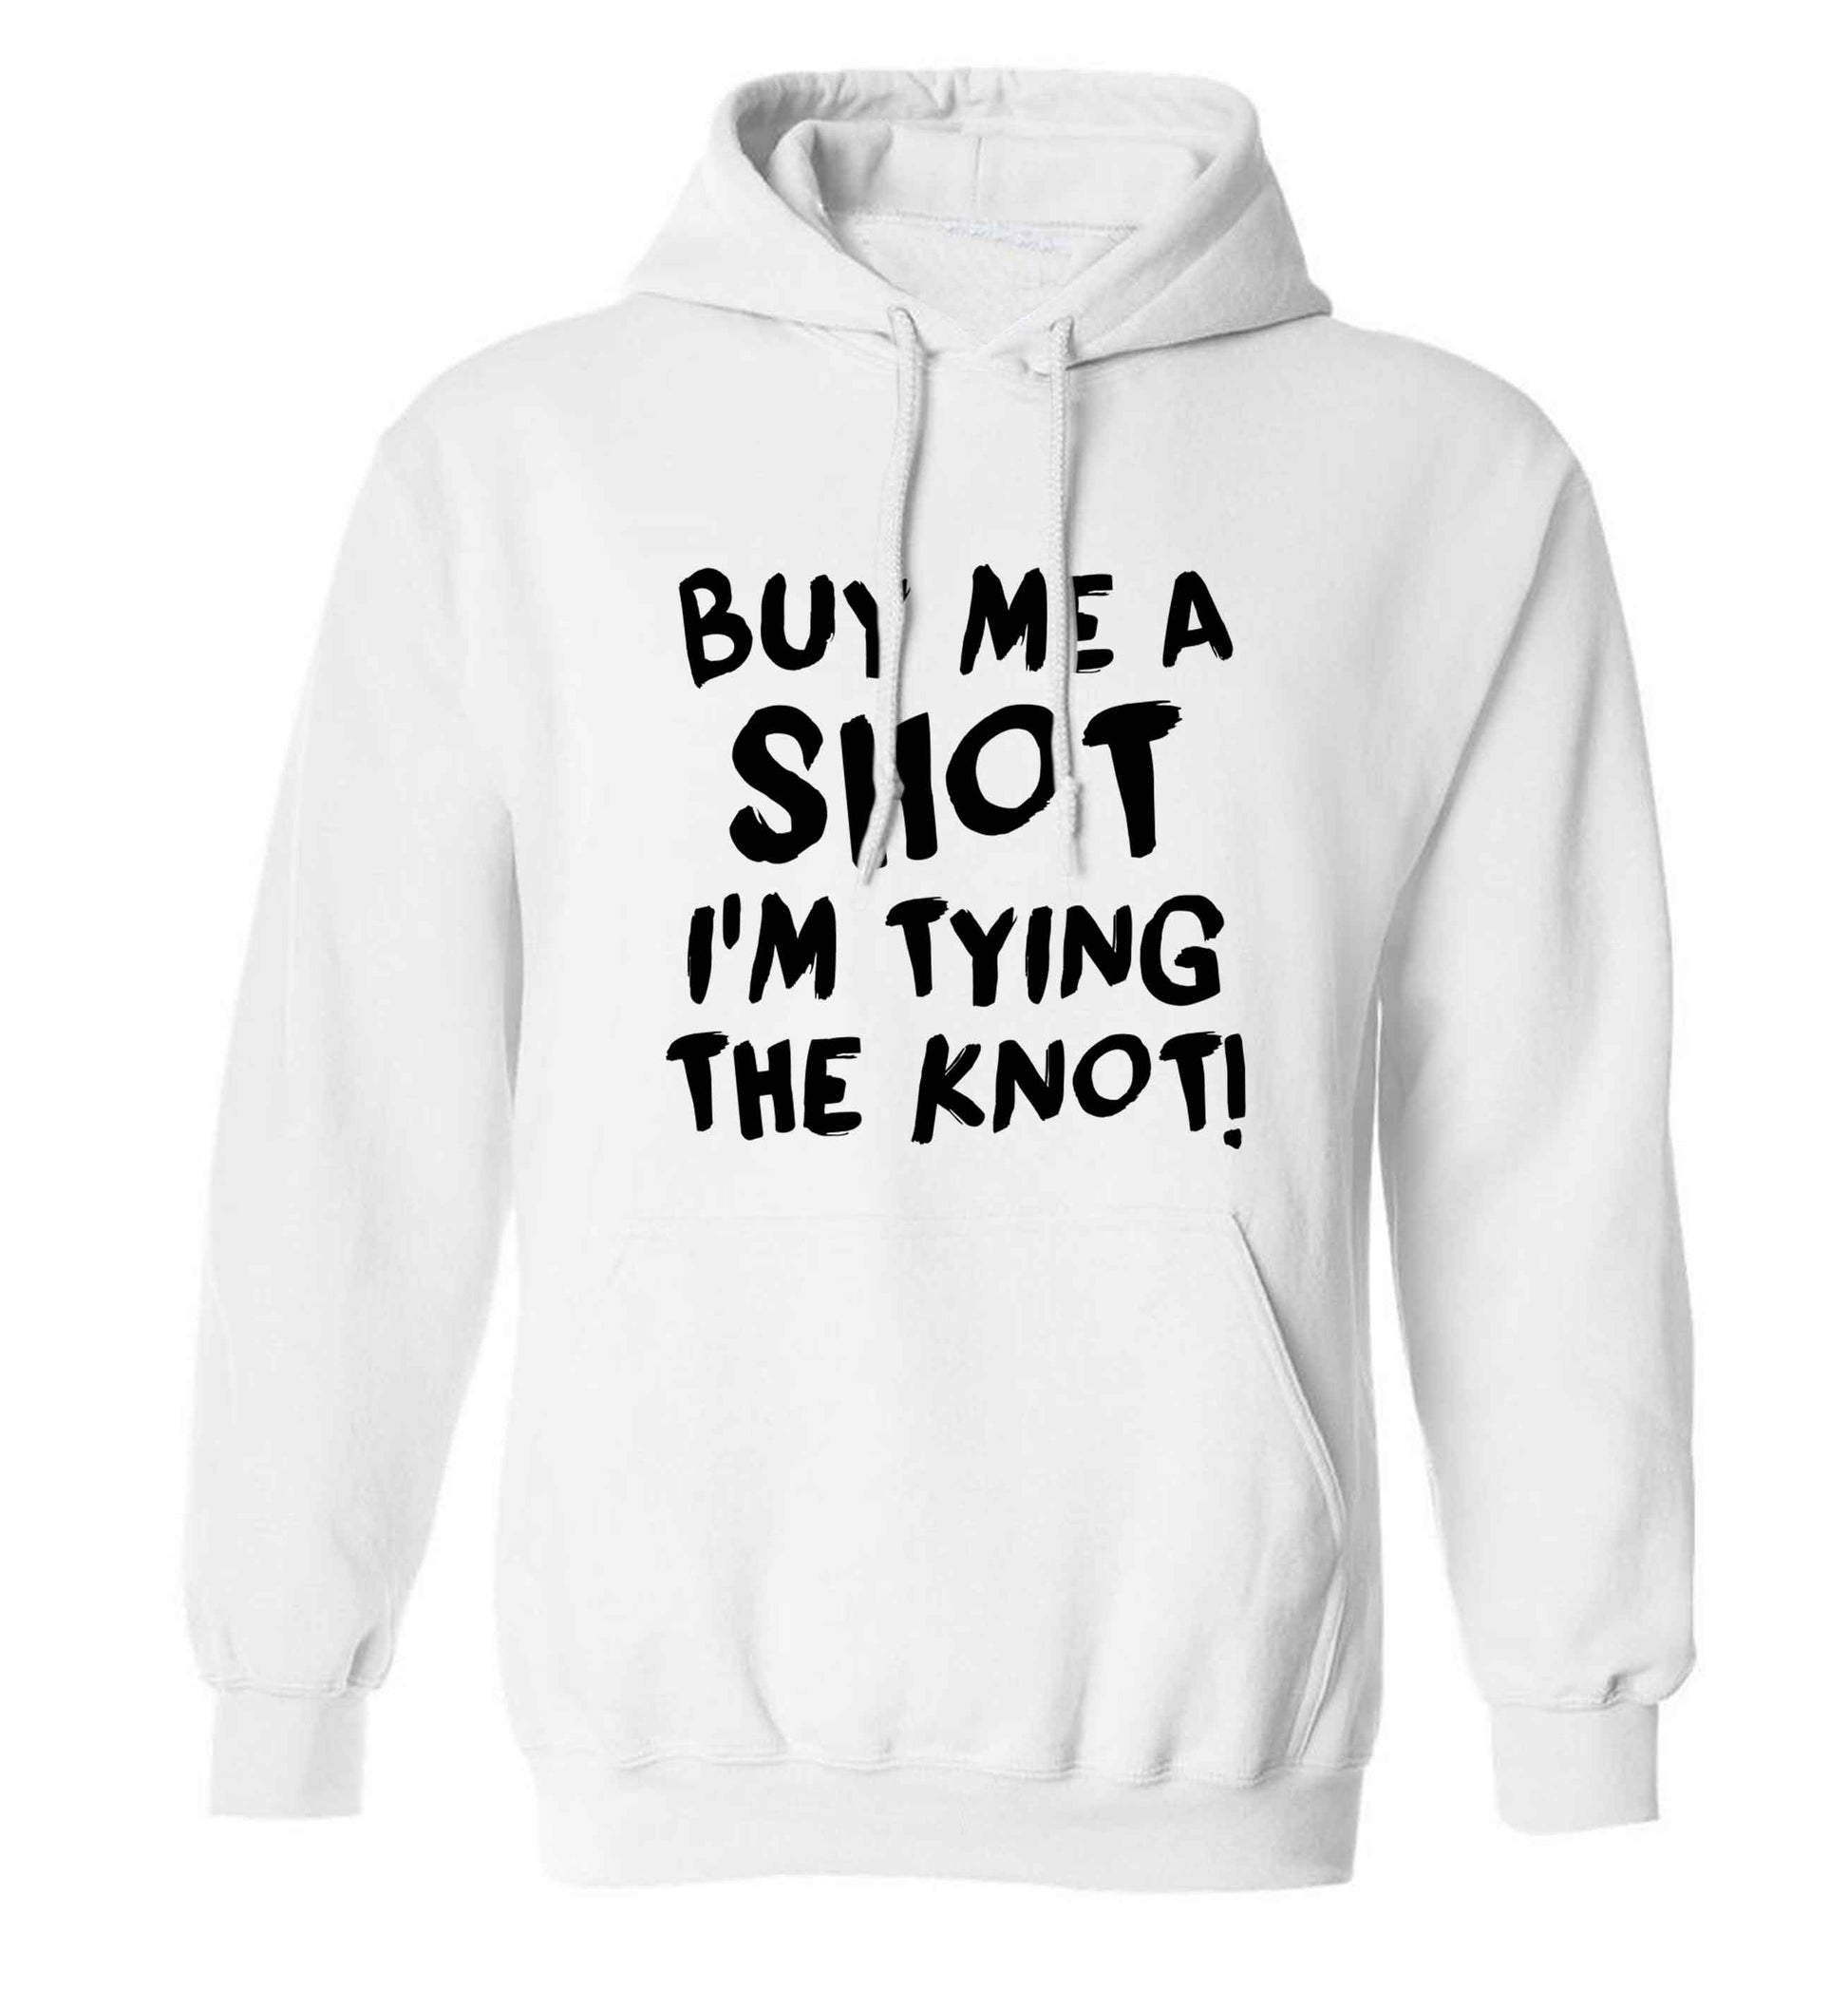 Get motivated and get fit for your big day! Our workout quotes and designs will get you ready to sweat! Perfect for any bride, groom or bridesmaid to be!  adults unisex white hoodie 2XL